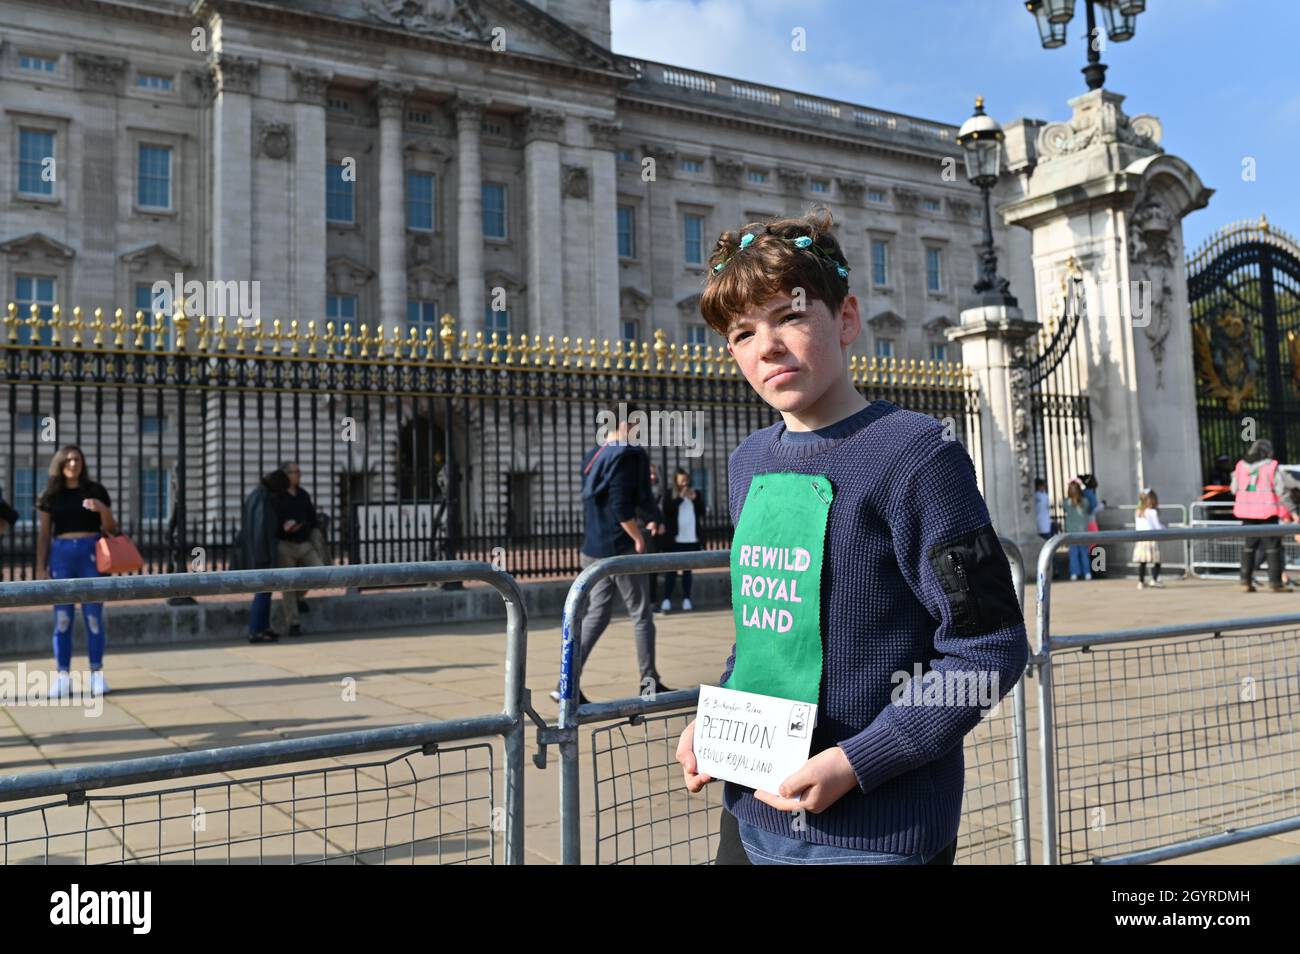 London, UK. 9 October 2021. Protestors joined by Chris Packham march to Buckingham Palace to consign a petition that calls for the Royal Family to rewild their land. Credit: Andrea Domeniconi/Alamy Live News Stock Photo